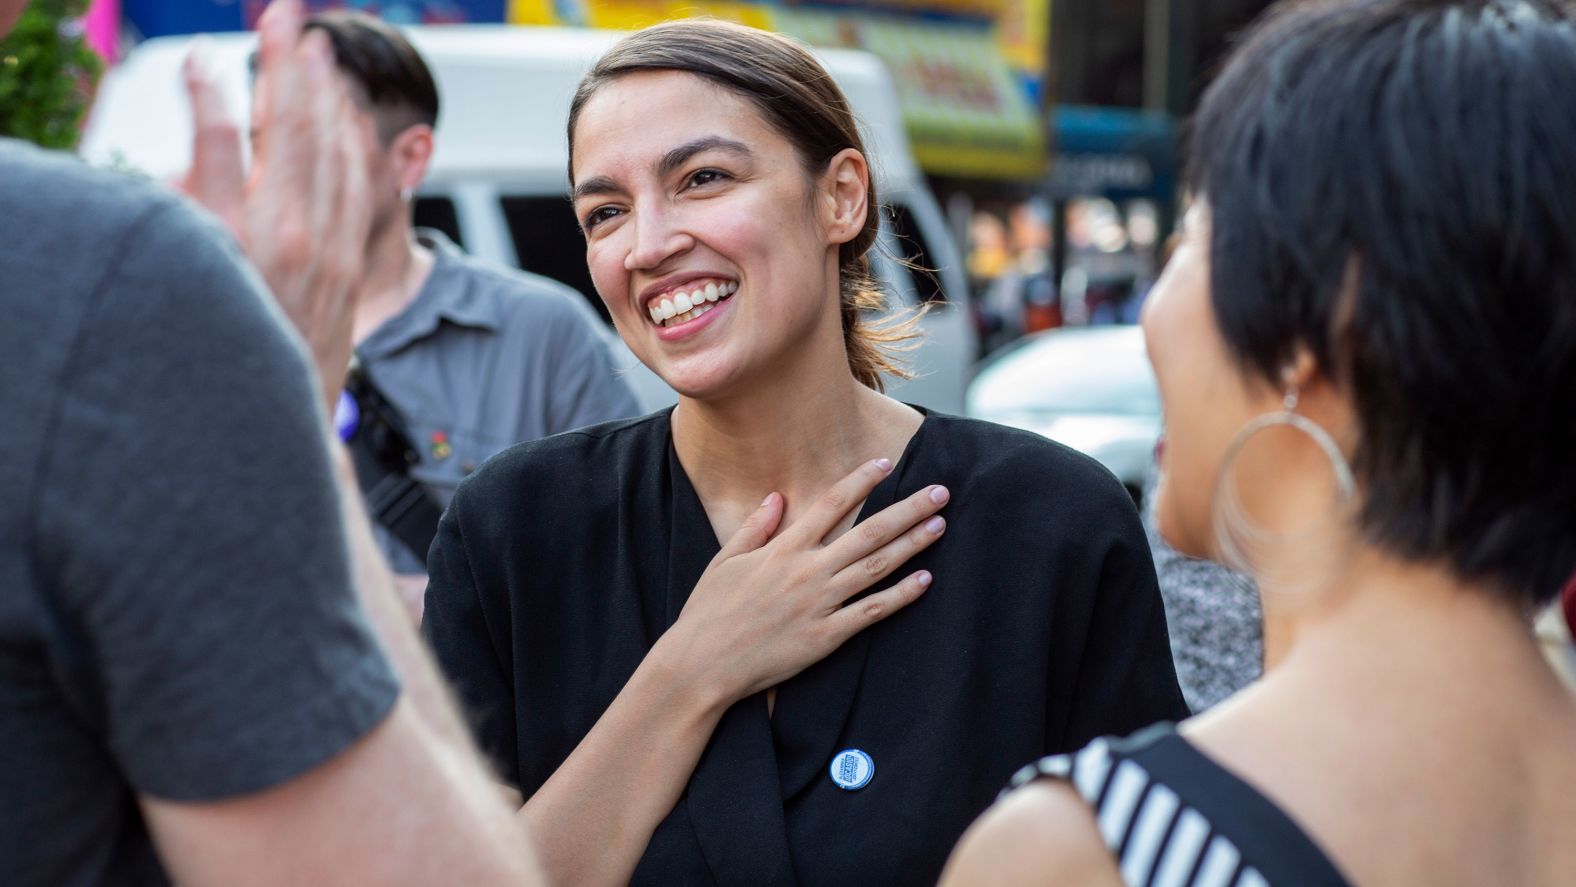 Ocasio-Cortez, seen here in a photo provided by her campaign, speaks with constituents.